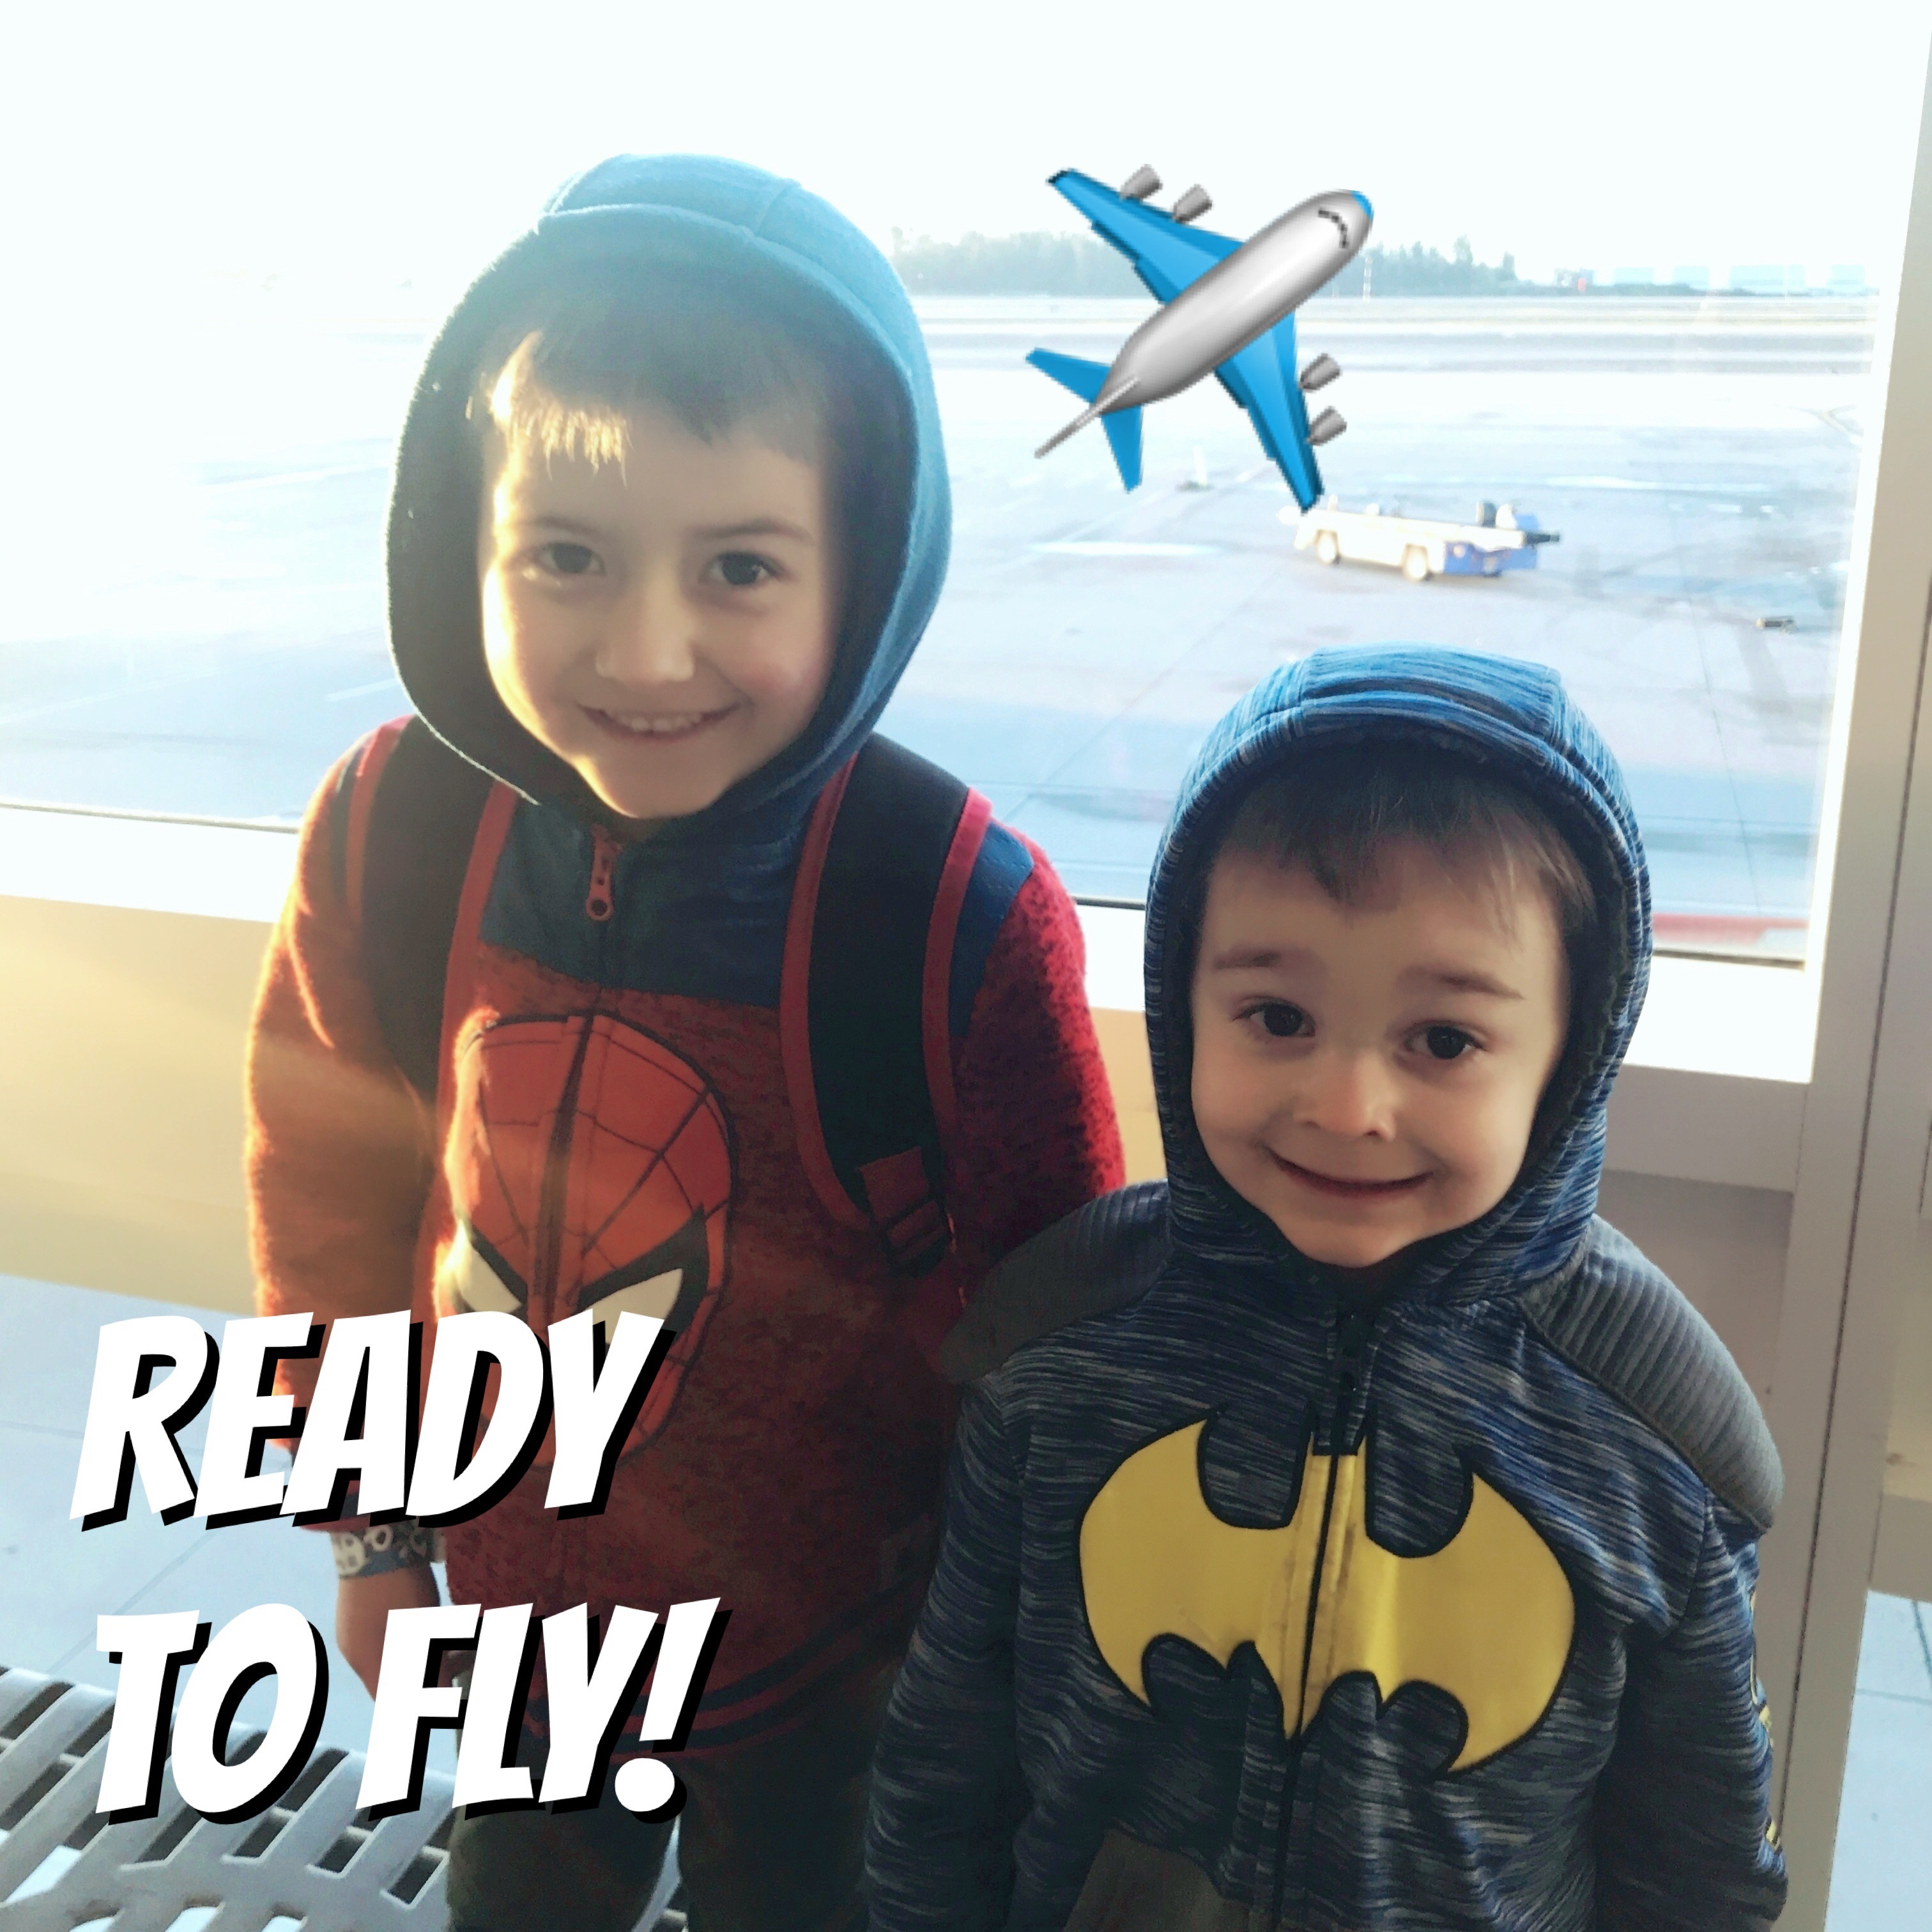 Two kids ready to fly on an airplane